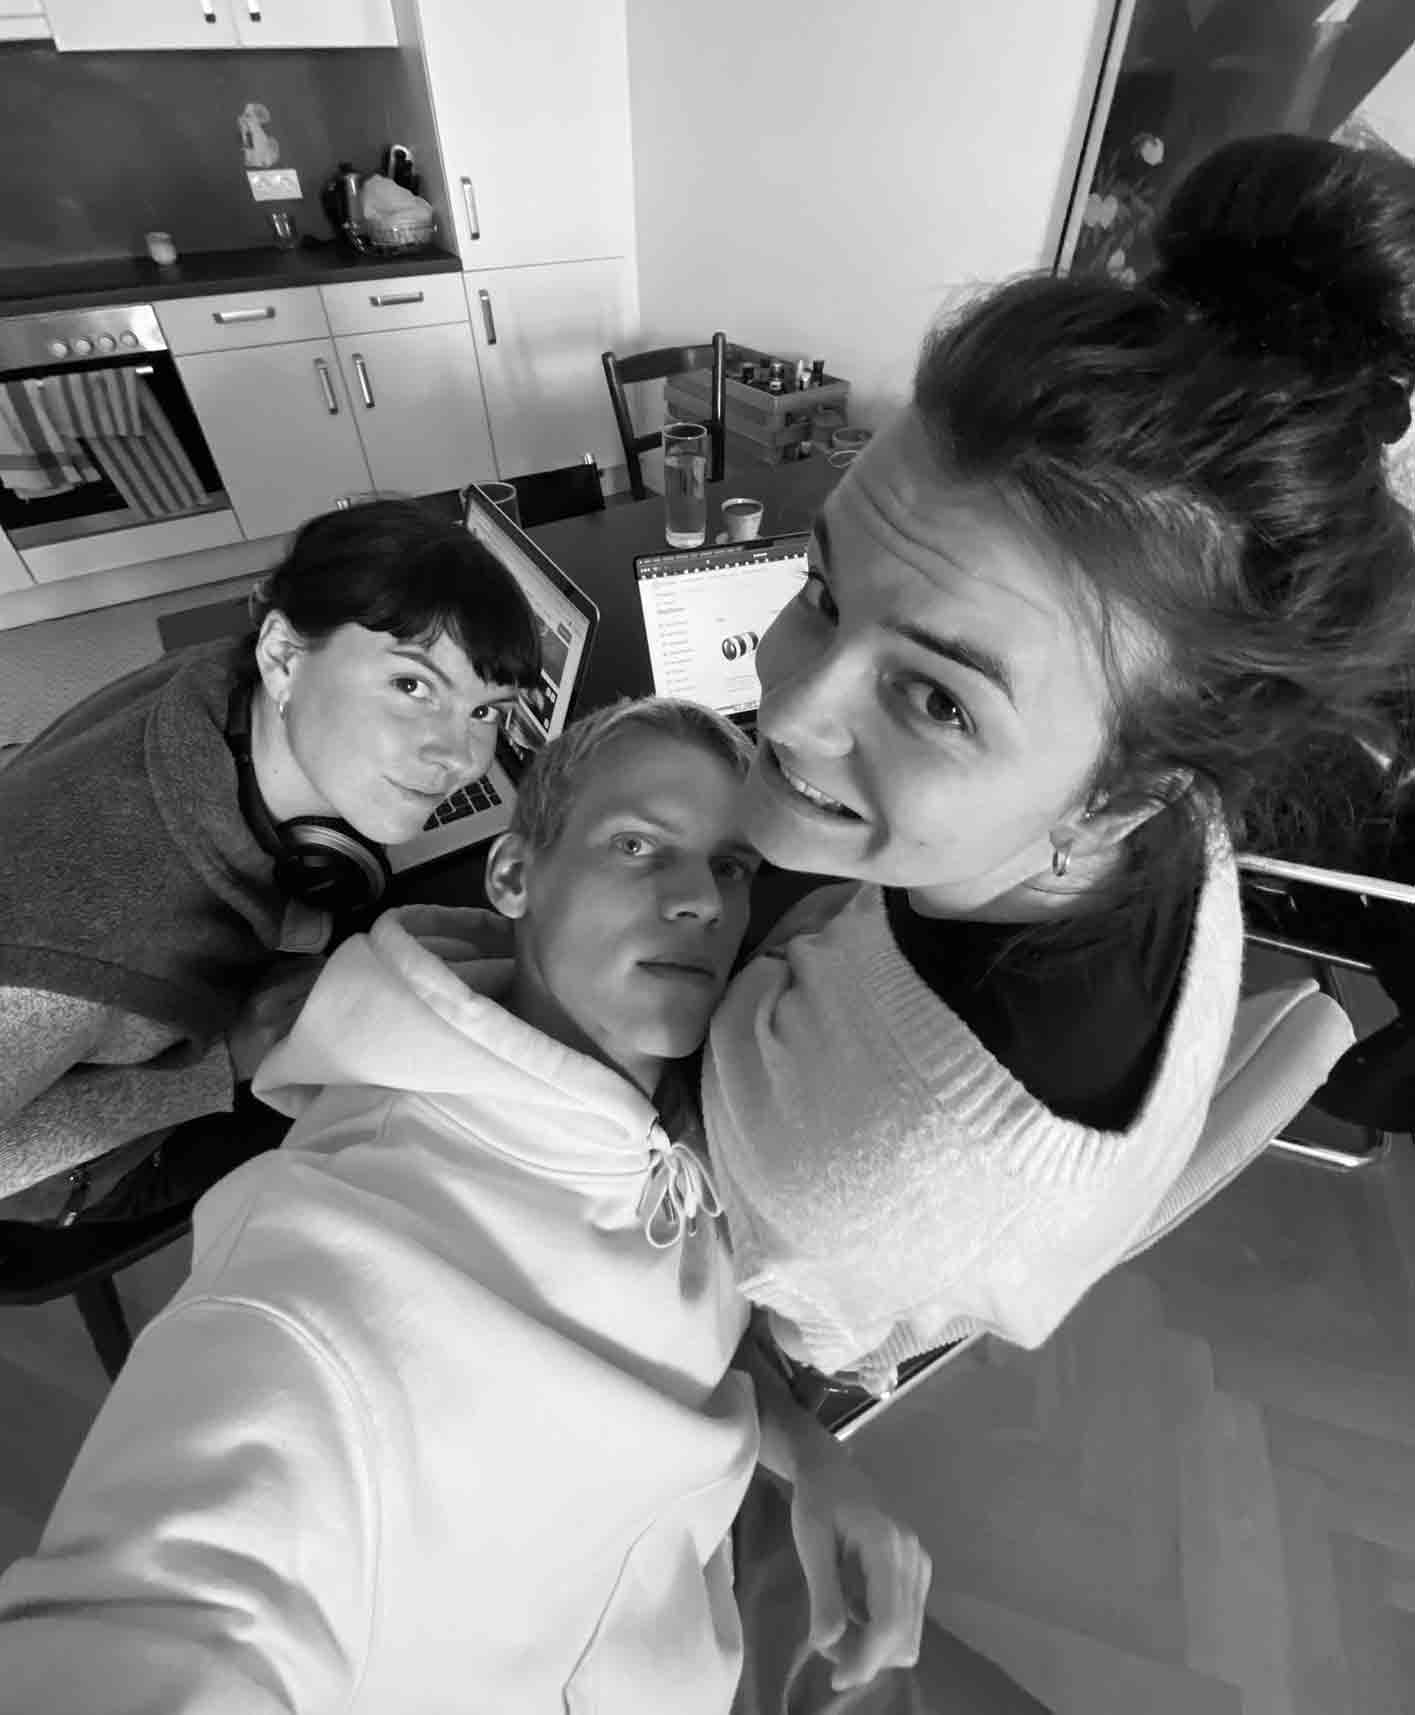 A black-and-white selfie of the three co-founders of RAWTY in fish-eye style working from home on their laptops.